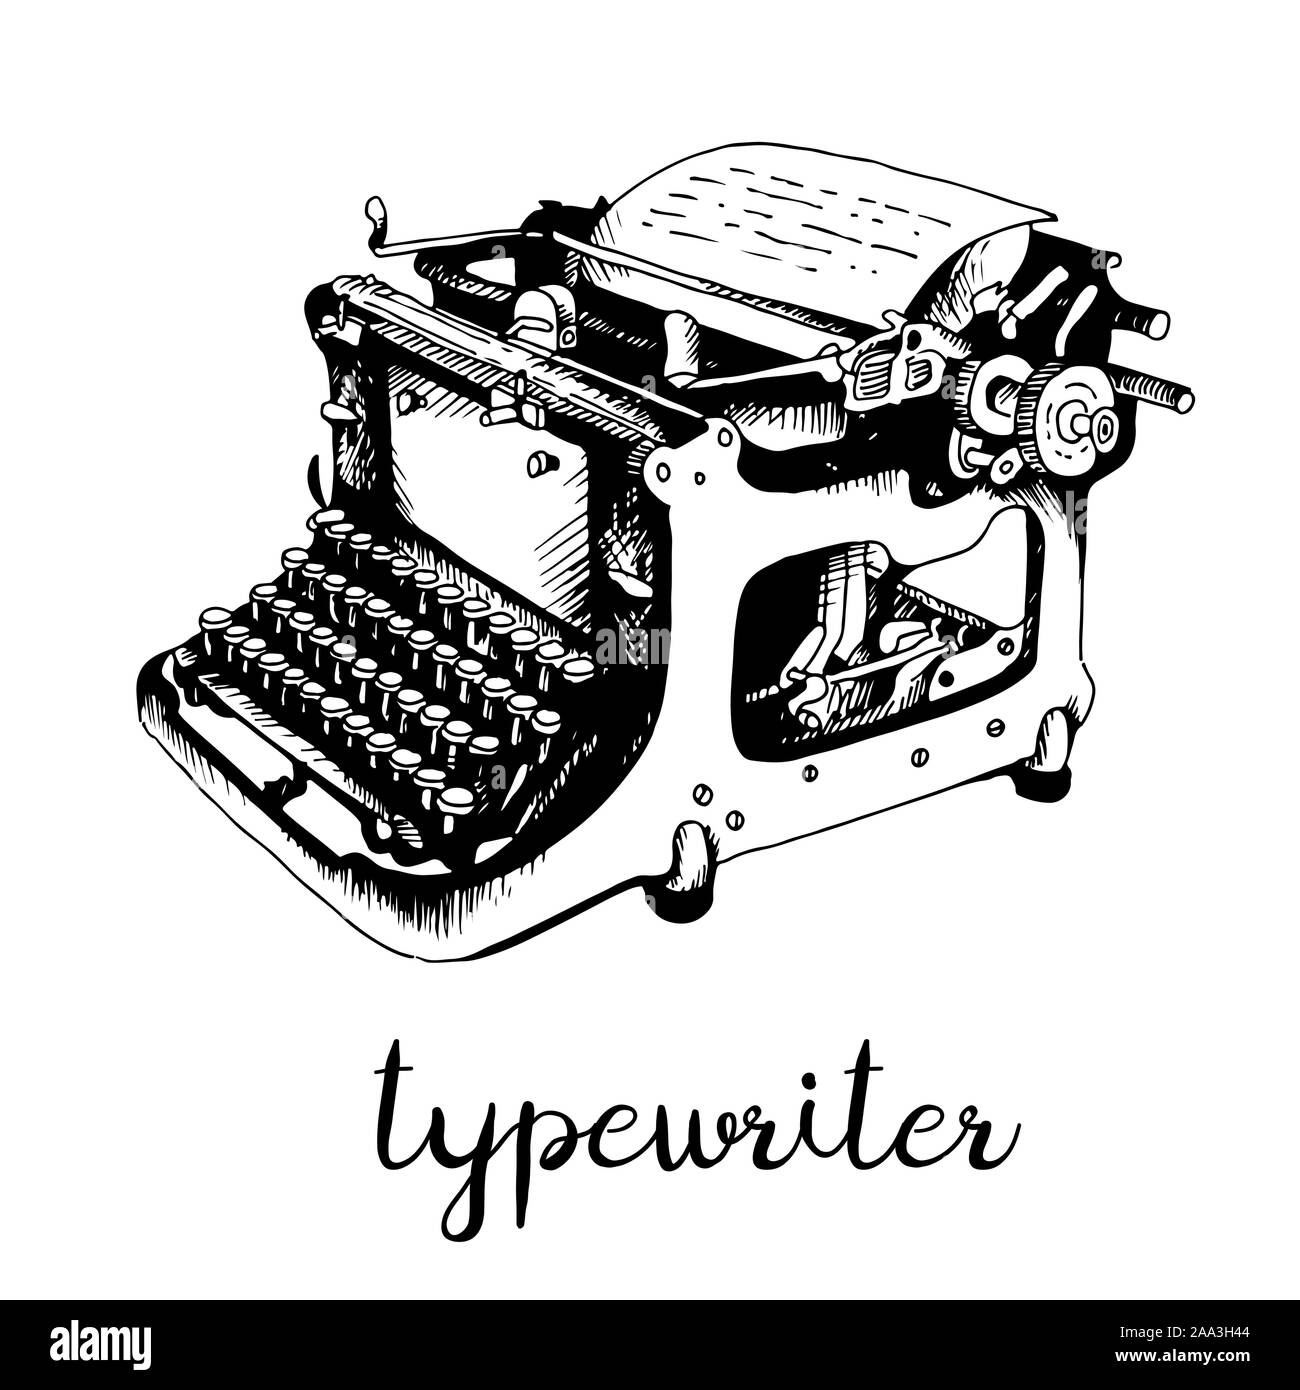 Typewriter hand drawn sketch, vector illustration isolated on white background Stock Vector